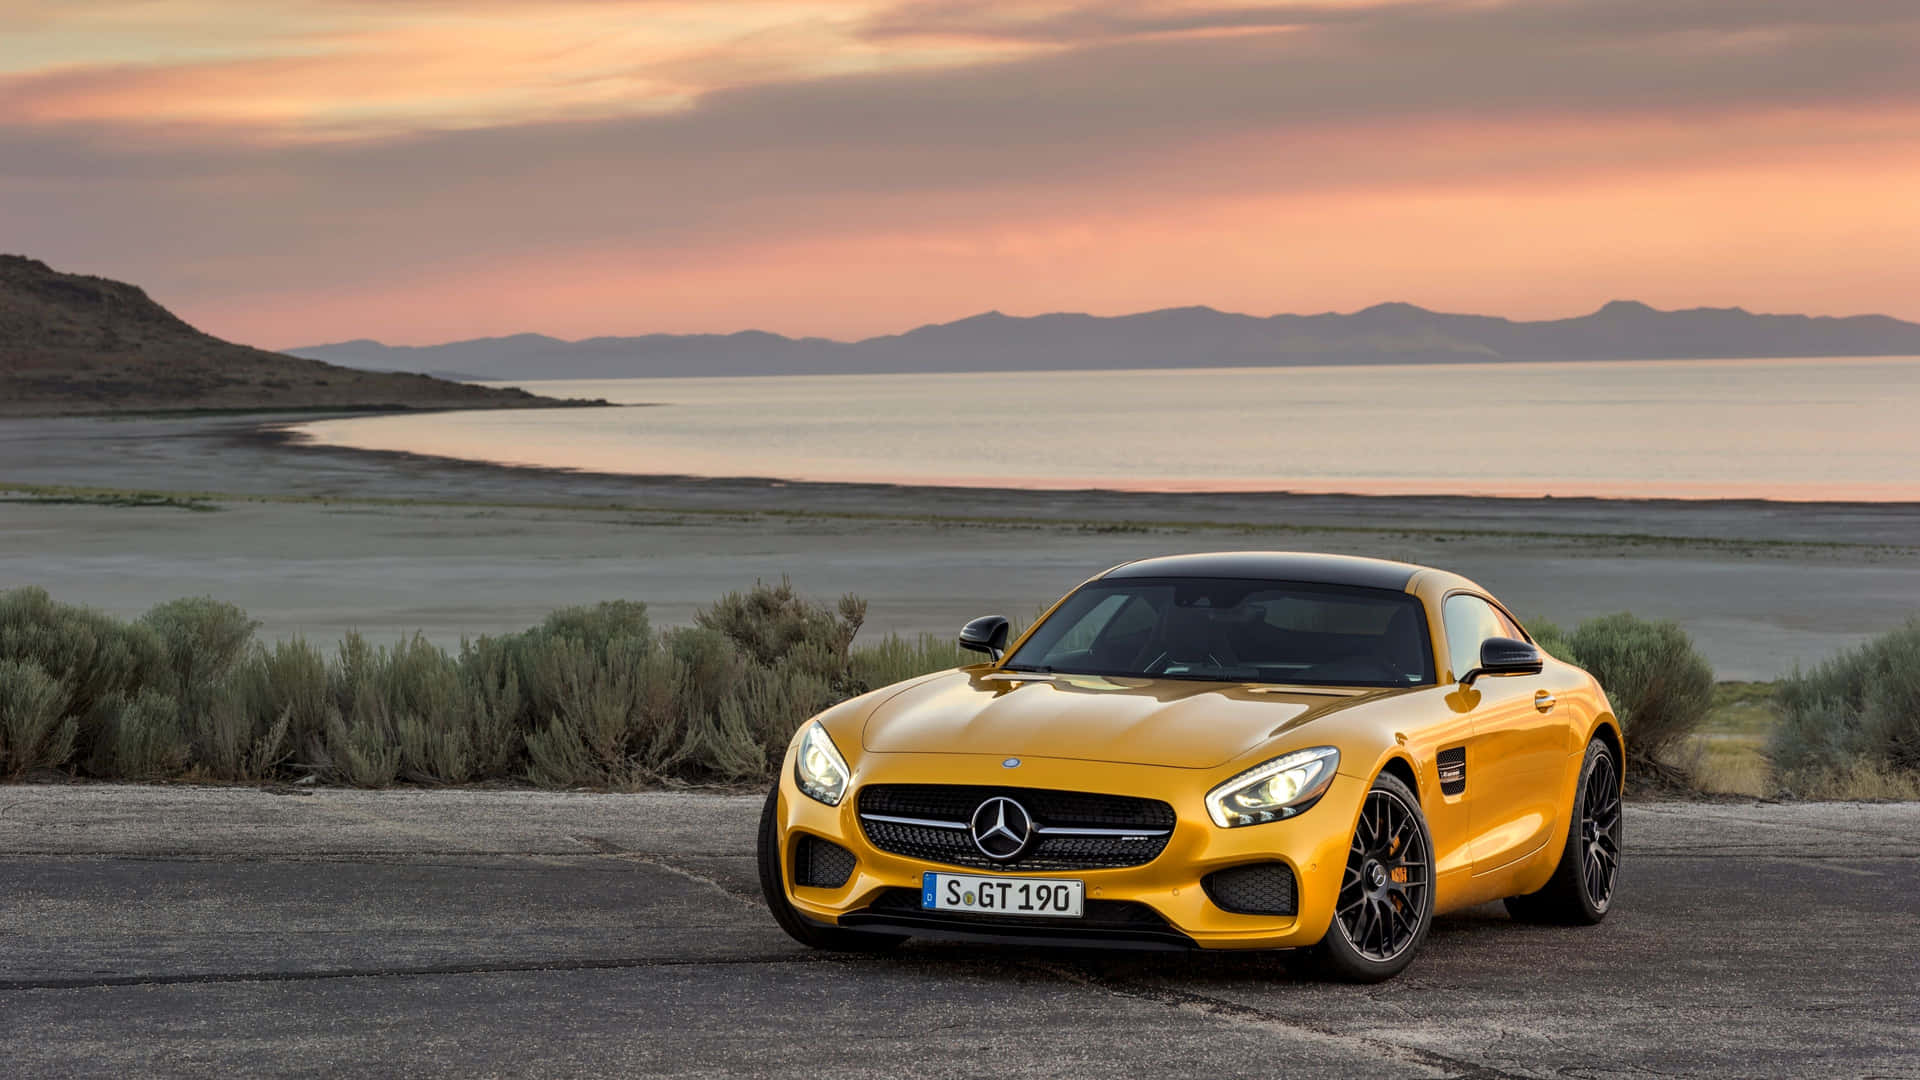 Displaying the German Engineering of the 2019 Mercedes AMG GT Wallpaper